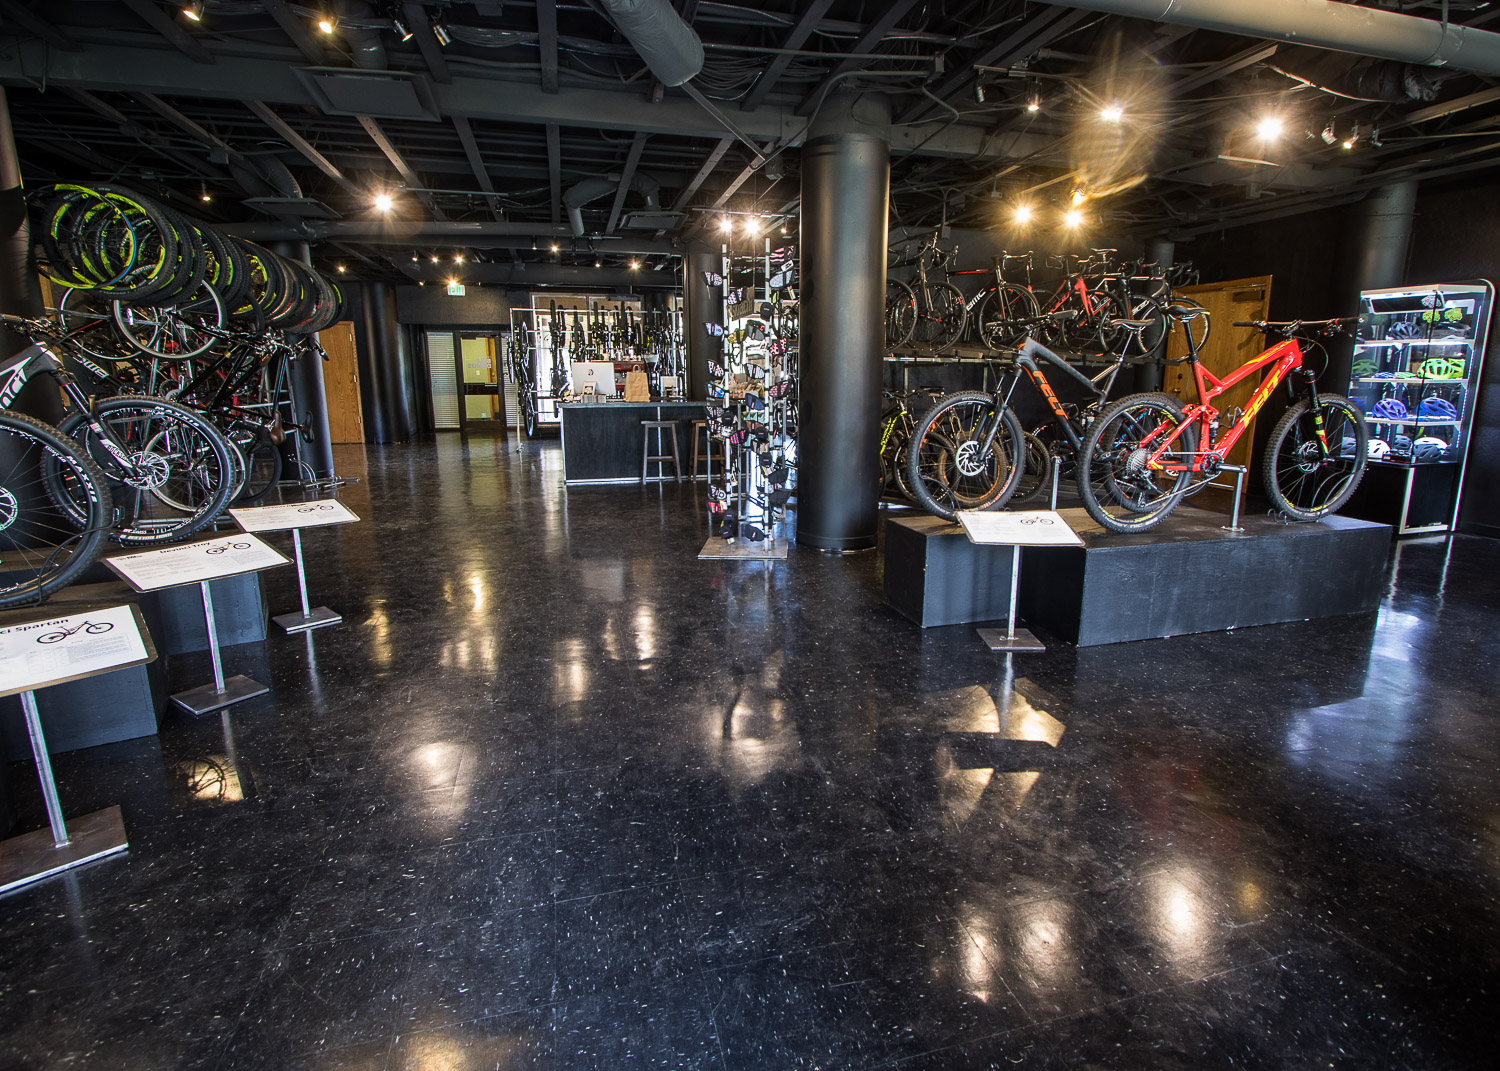 Park City Bike Demos sells demo and rental bikes to customers out of its 2,800 square-foot retail space. photo by John Shafer